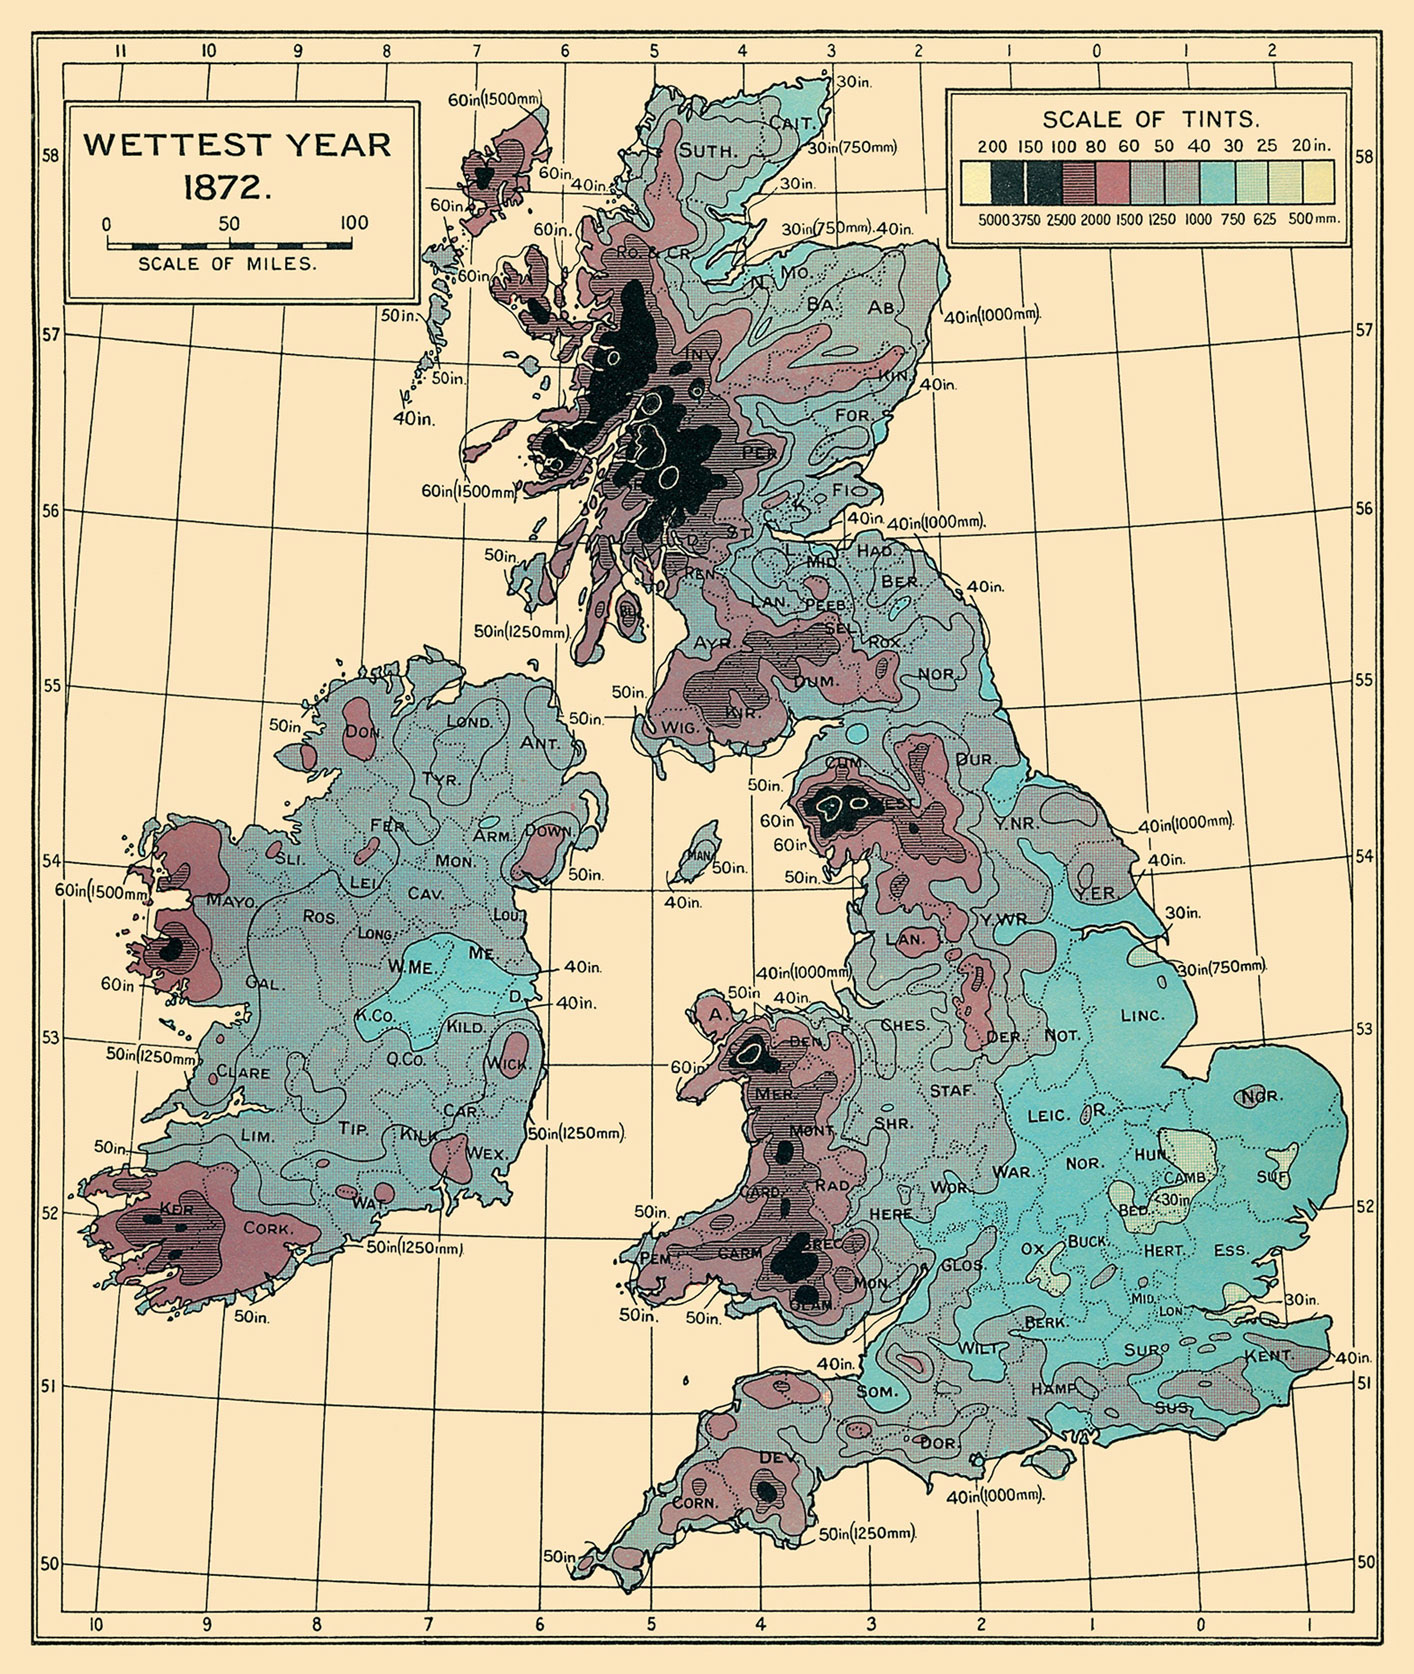 An illustration from the 1926 edition of the Rainfall Atlas of the British Isles. 